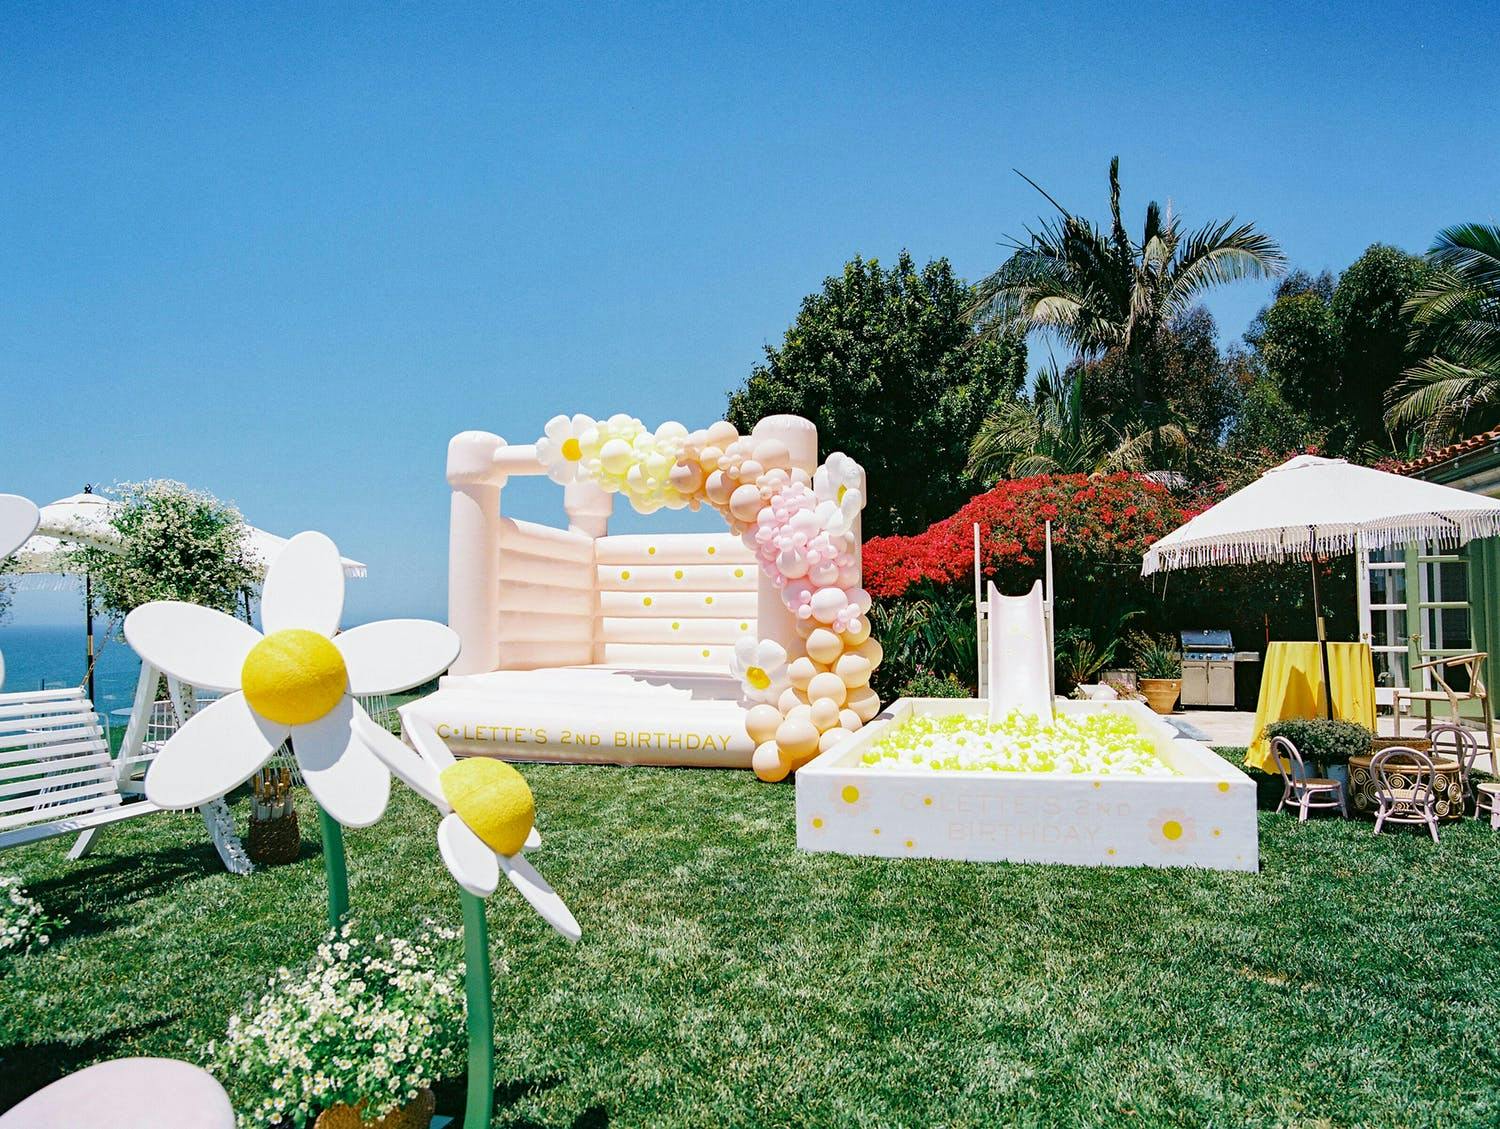 Outdoor daisy-themed kid's birthday party with ball pit and bouncy house | PartySlate